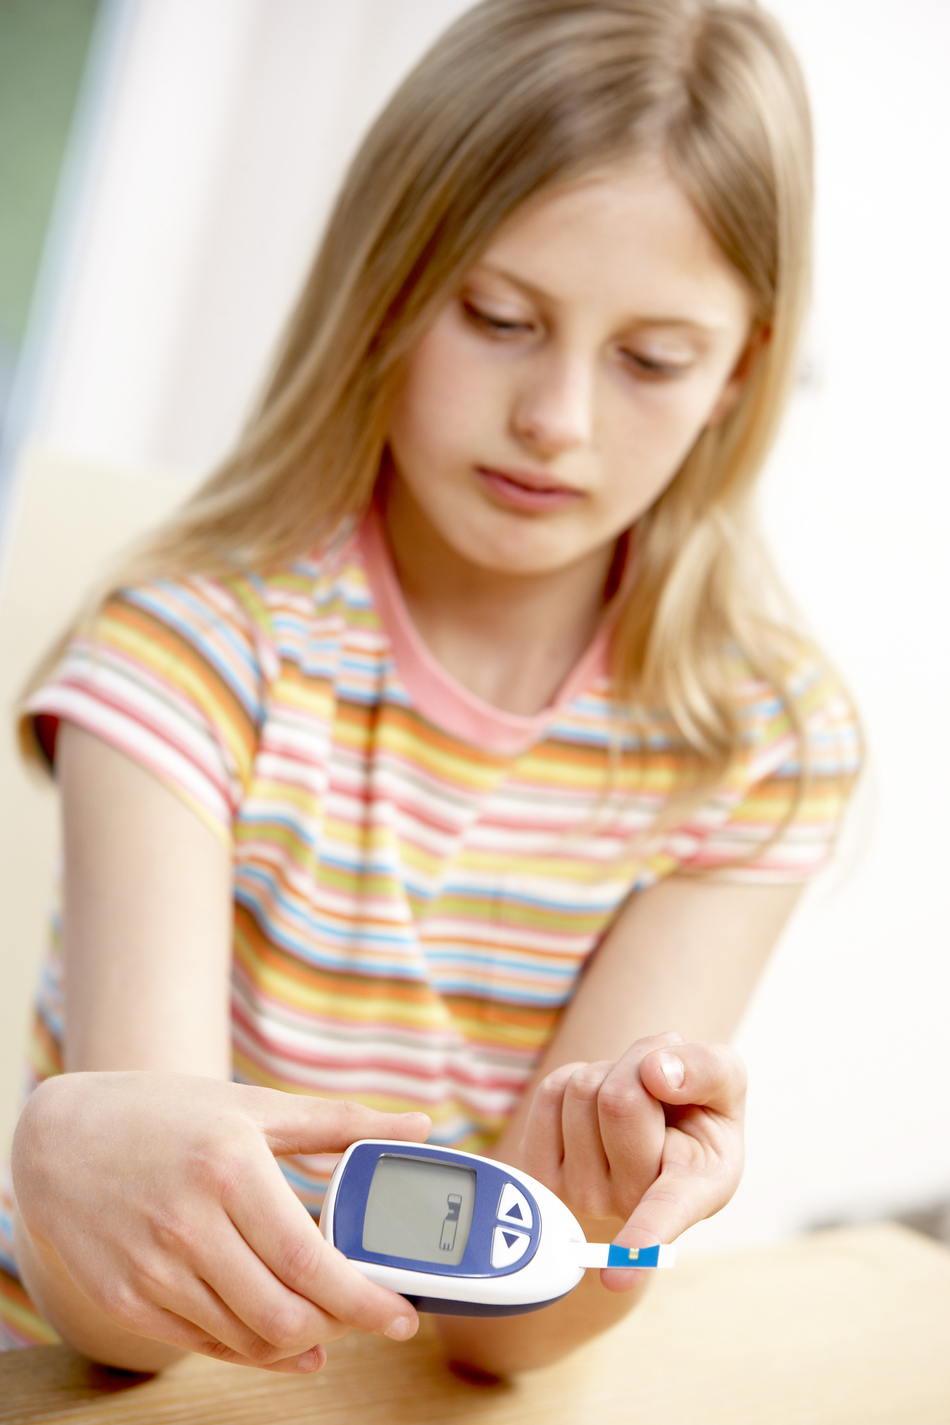 My Child was Just Diagnosed With Type 1 Diabetes. Now What?